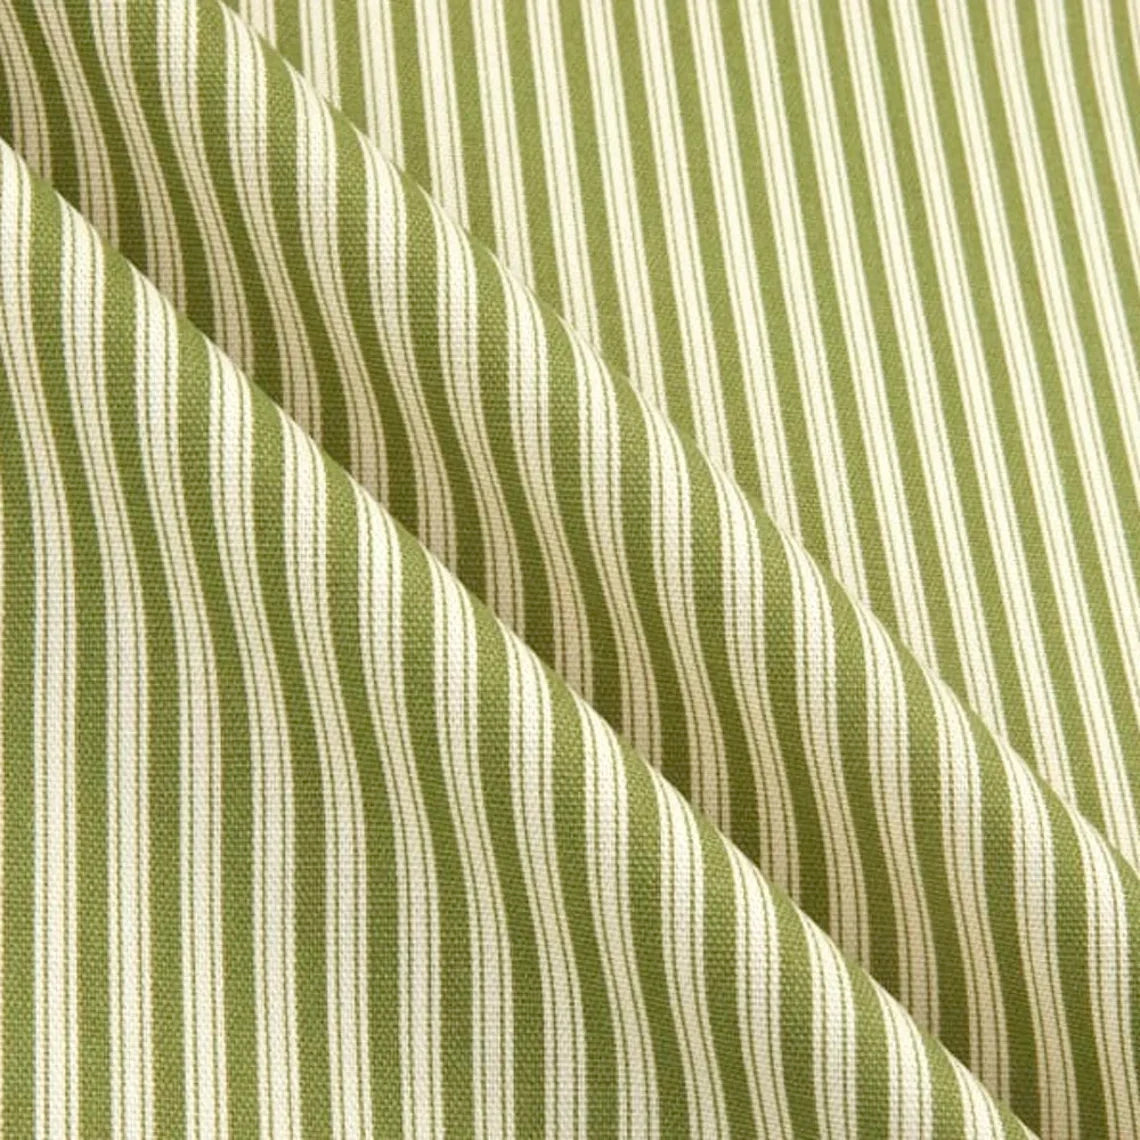 pinch pleated curtain panels pair in polo jungle green stripe on cream